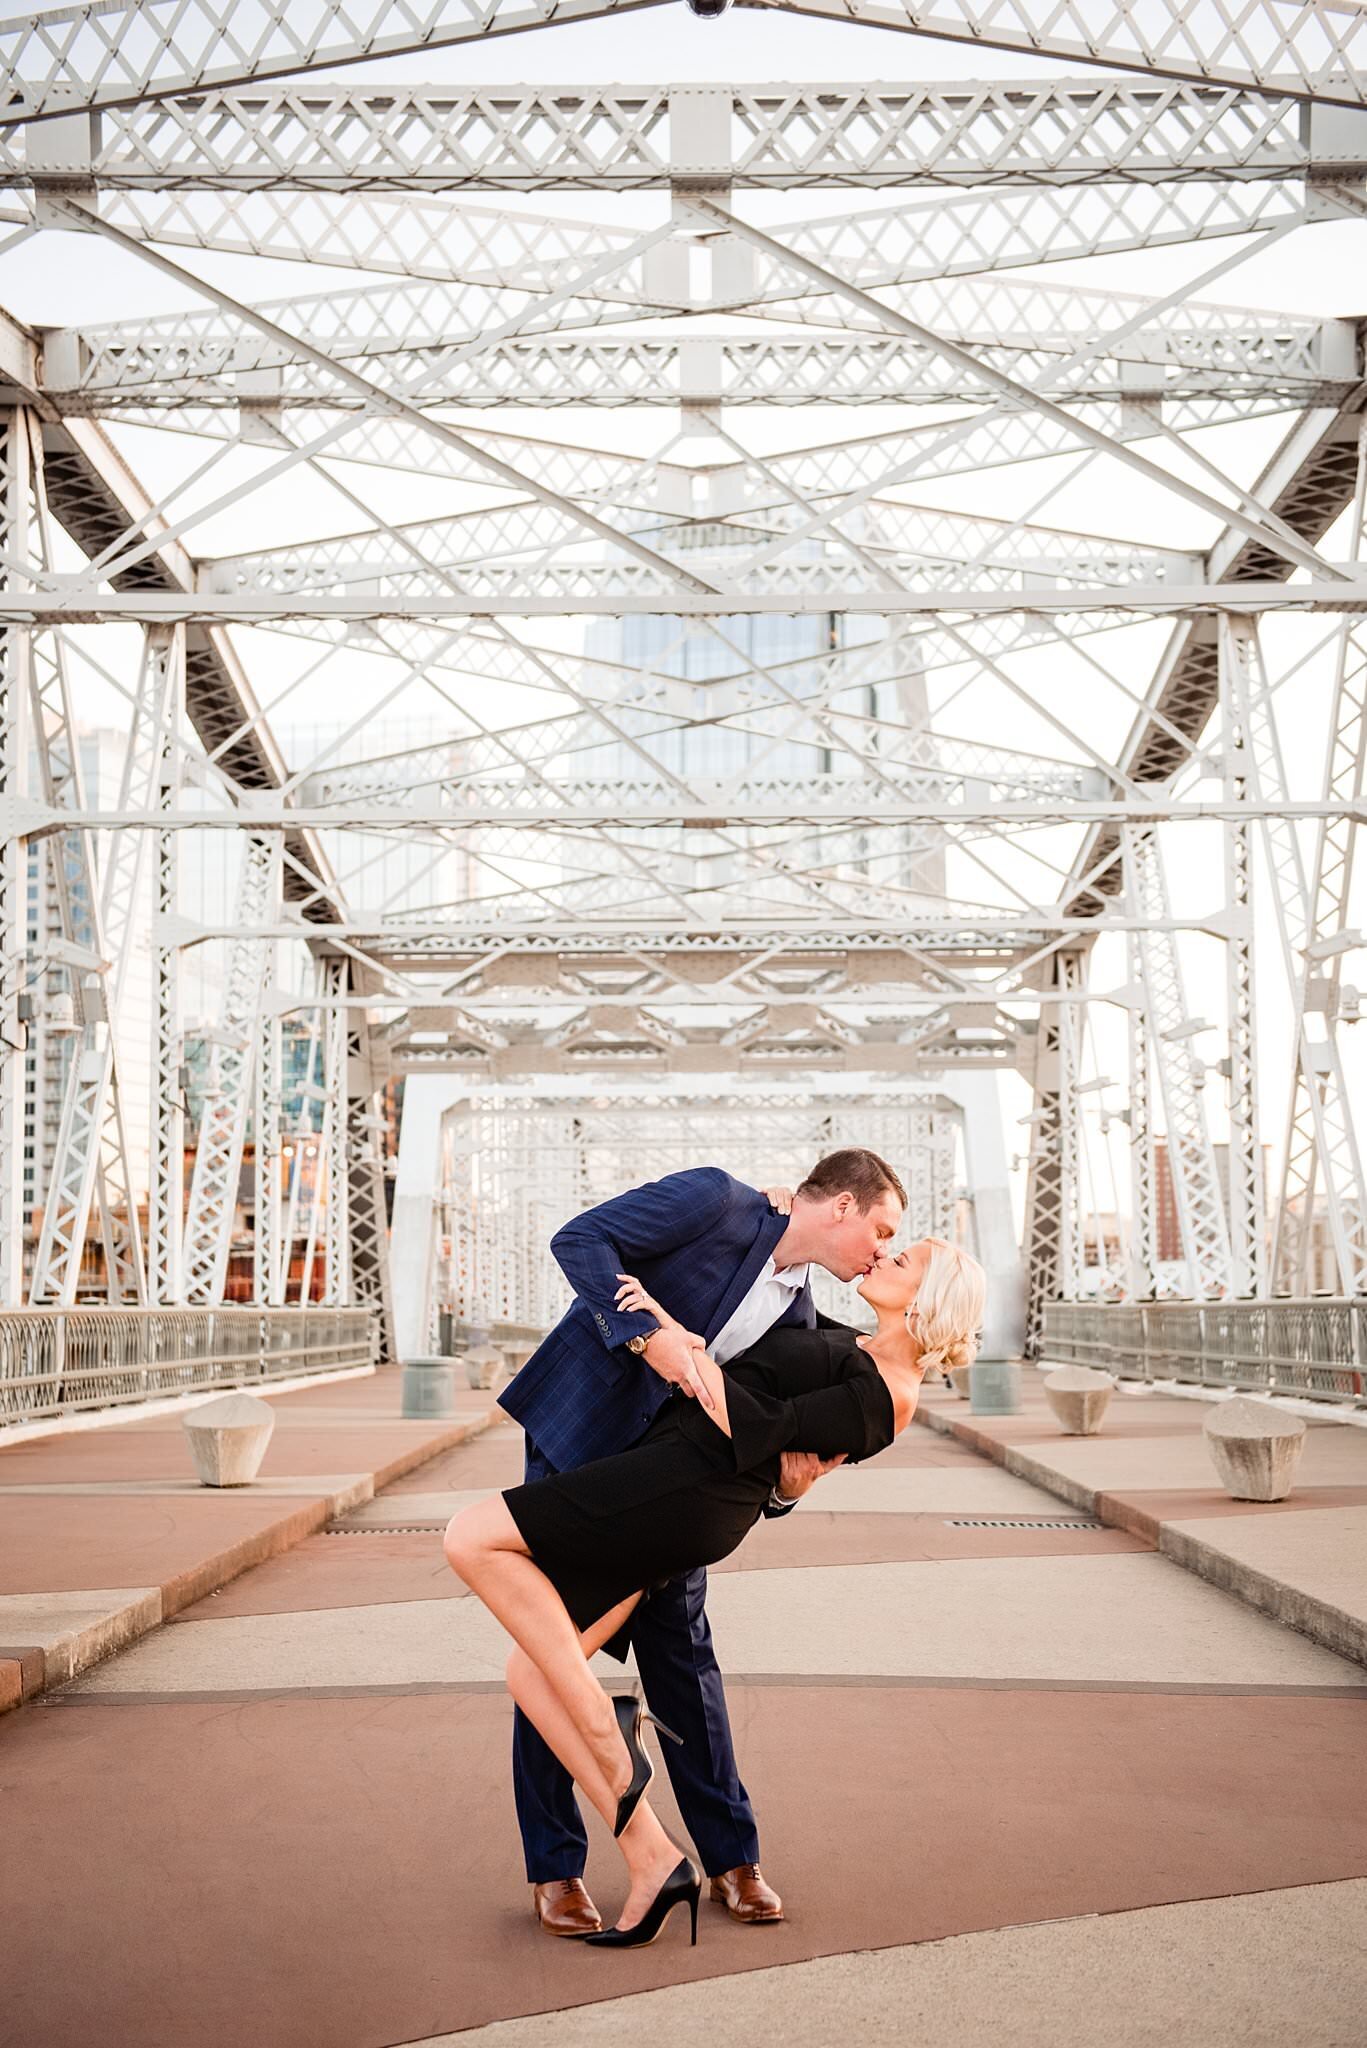 Man dipping his fiance while standing atop the Nashville pedestrian bridge, he's in a blue suit and she is wearing an elegant black dress and heels